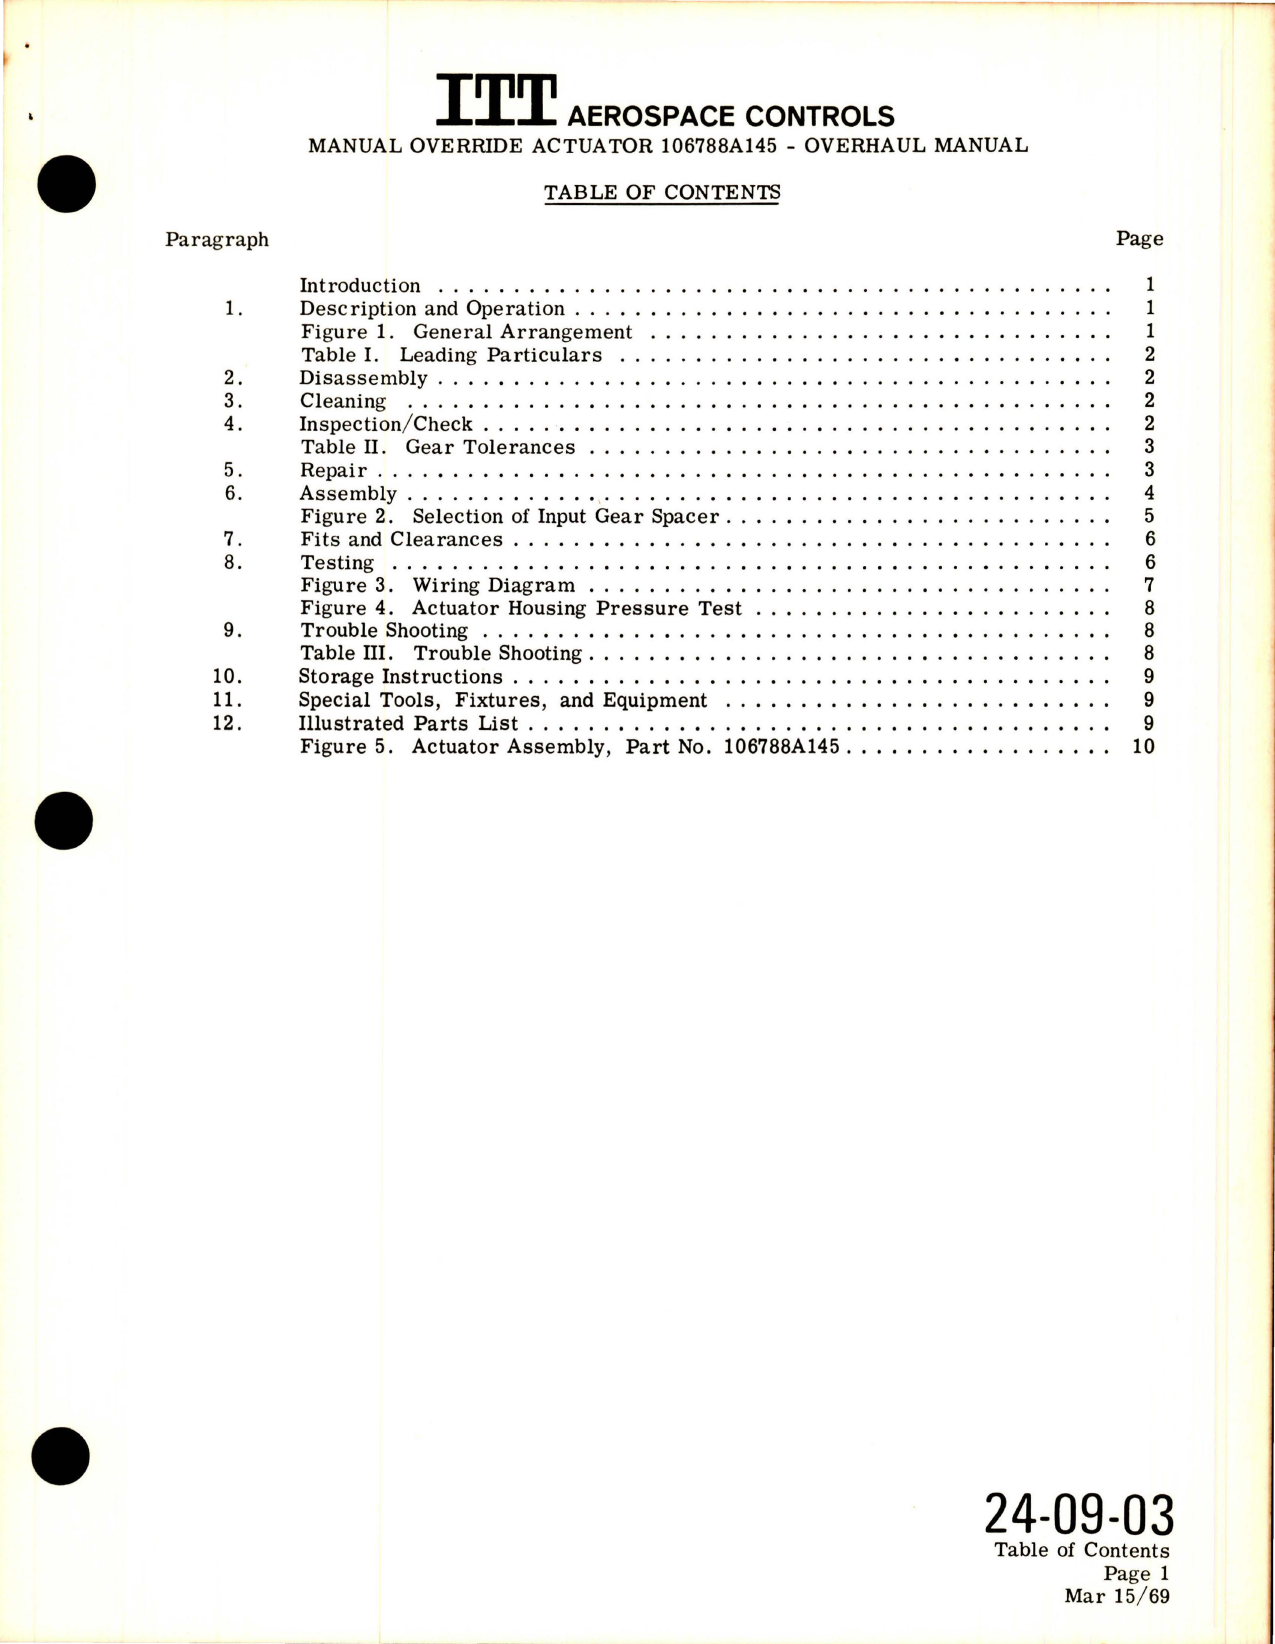 Sample page 5 from AirCorps Library document: Overhaul Instructions with Parts Lists for Manual Override Actuator - Part 106788A145